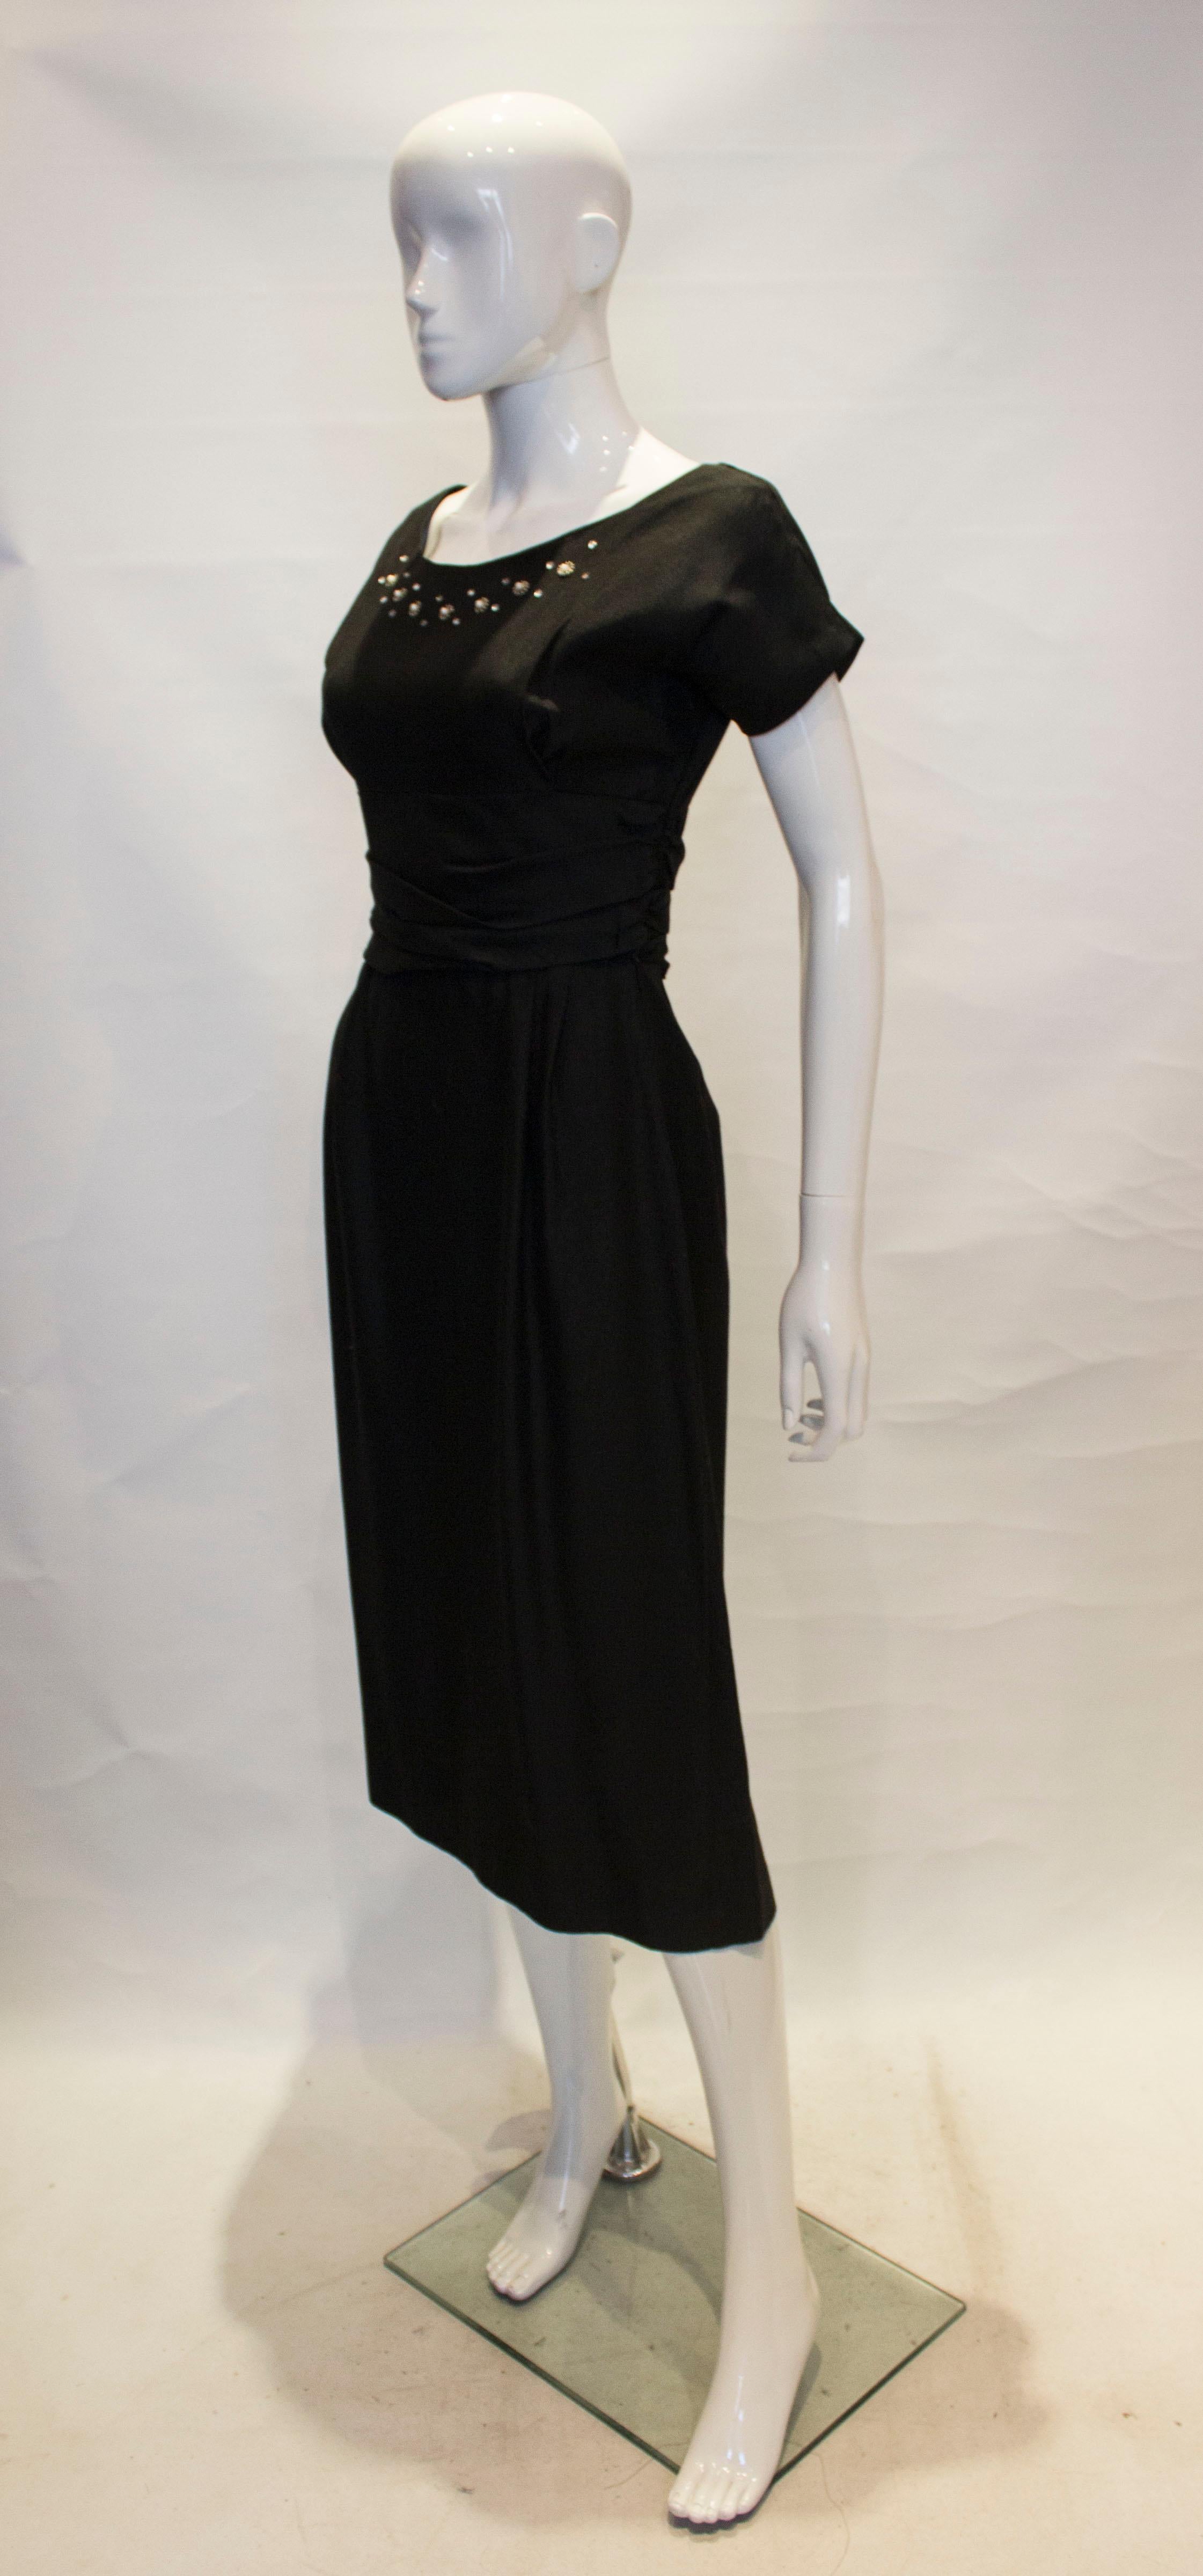 Vintage 1950s Black Cocktail Dress In Good Condition For Sale In London, GB